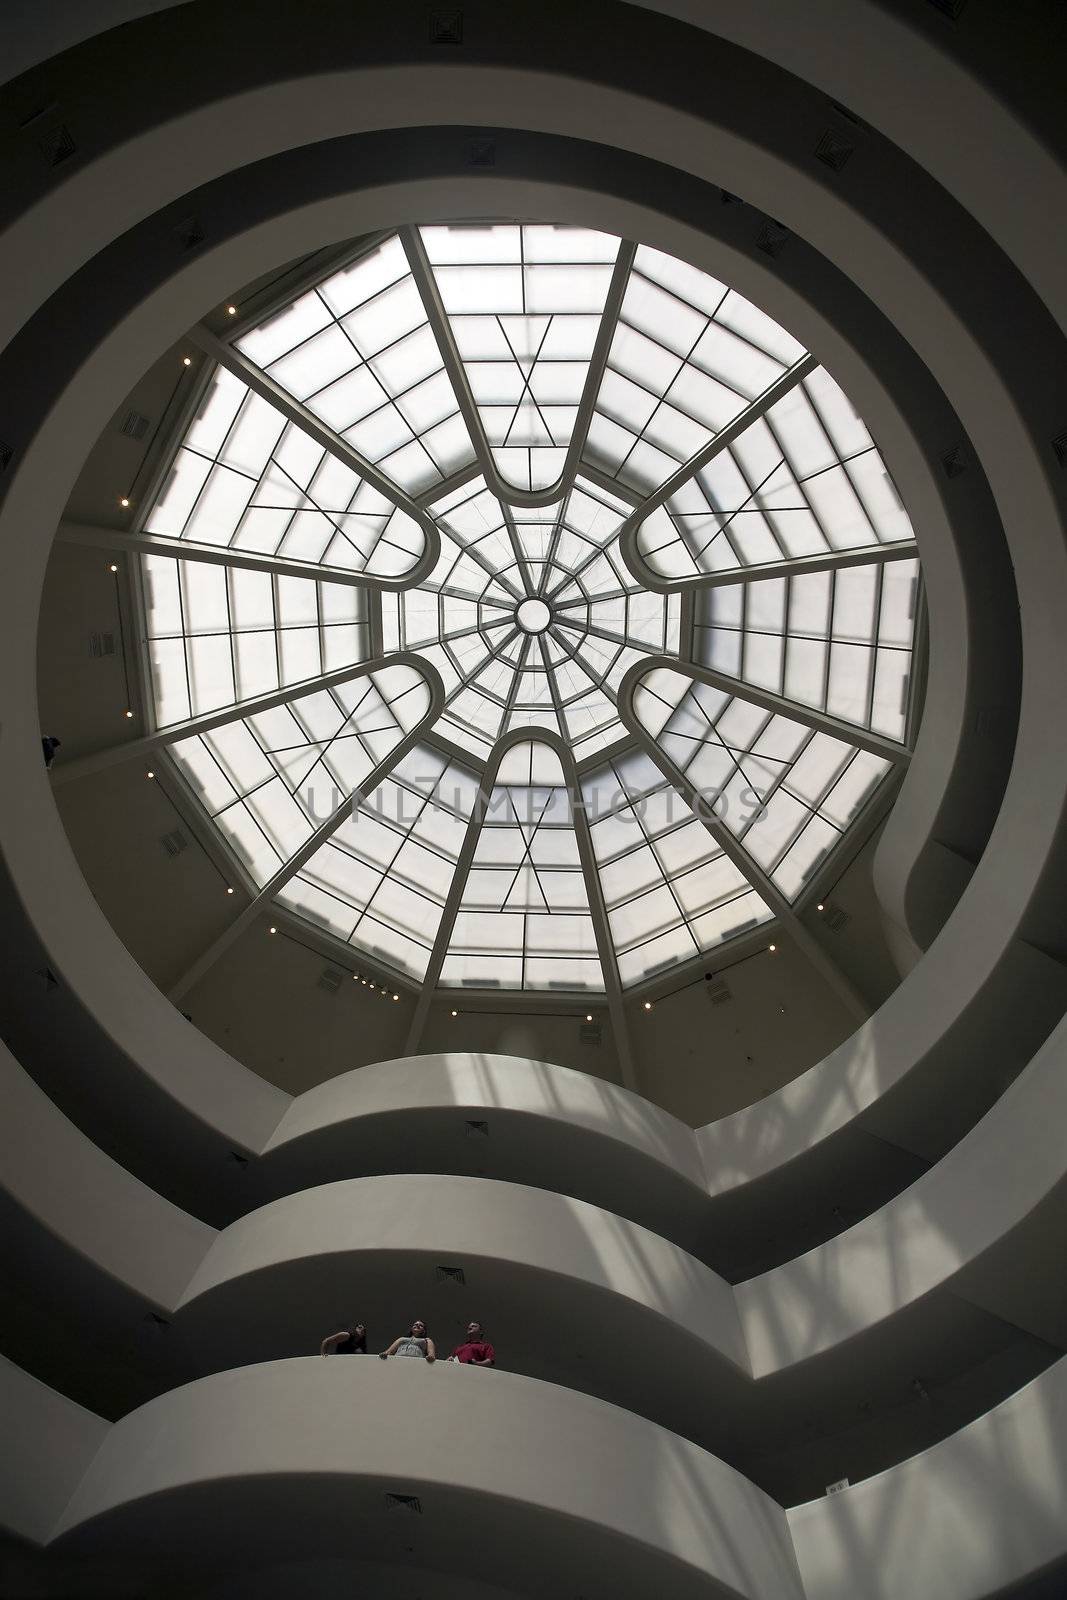 The Solomon R. Guggenheim Museum (often referred to as The Guggenheim) is a well-known museum located on the Upper East Side of Manhattan in New York City, US. It is the permanent home to a renowned collection of Impressionist, Post-Impressionist, early Modern. The distinctive building of the museum designed by Frank Lloyd Wright became a cultural icon and one of the 20th century's most important architectural landmarks.